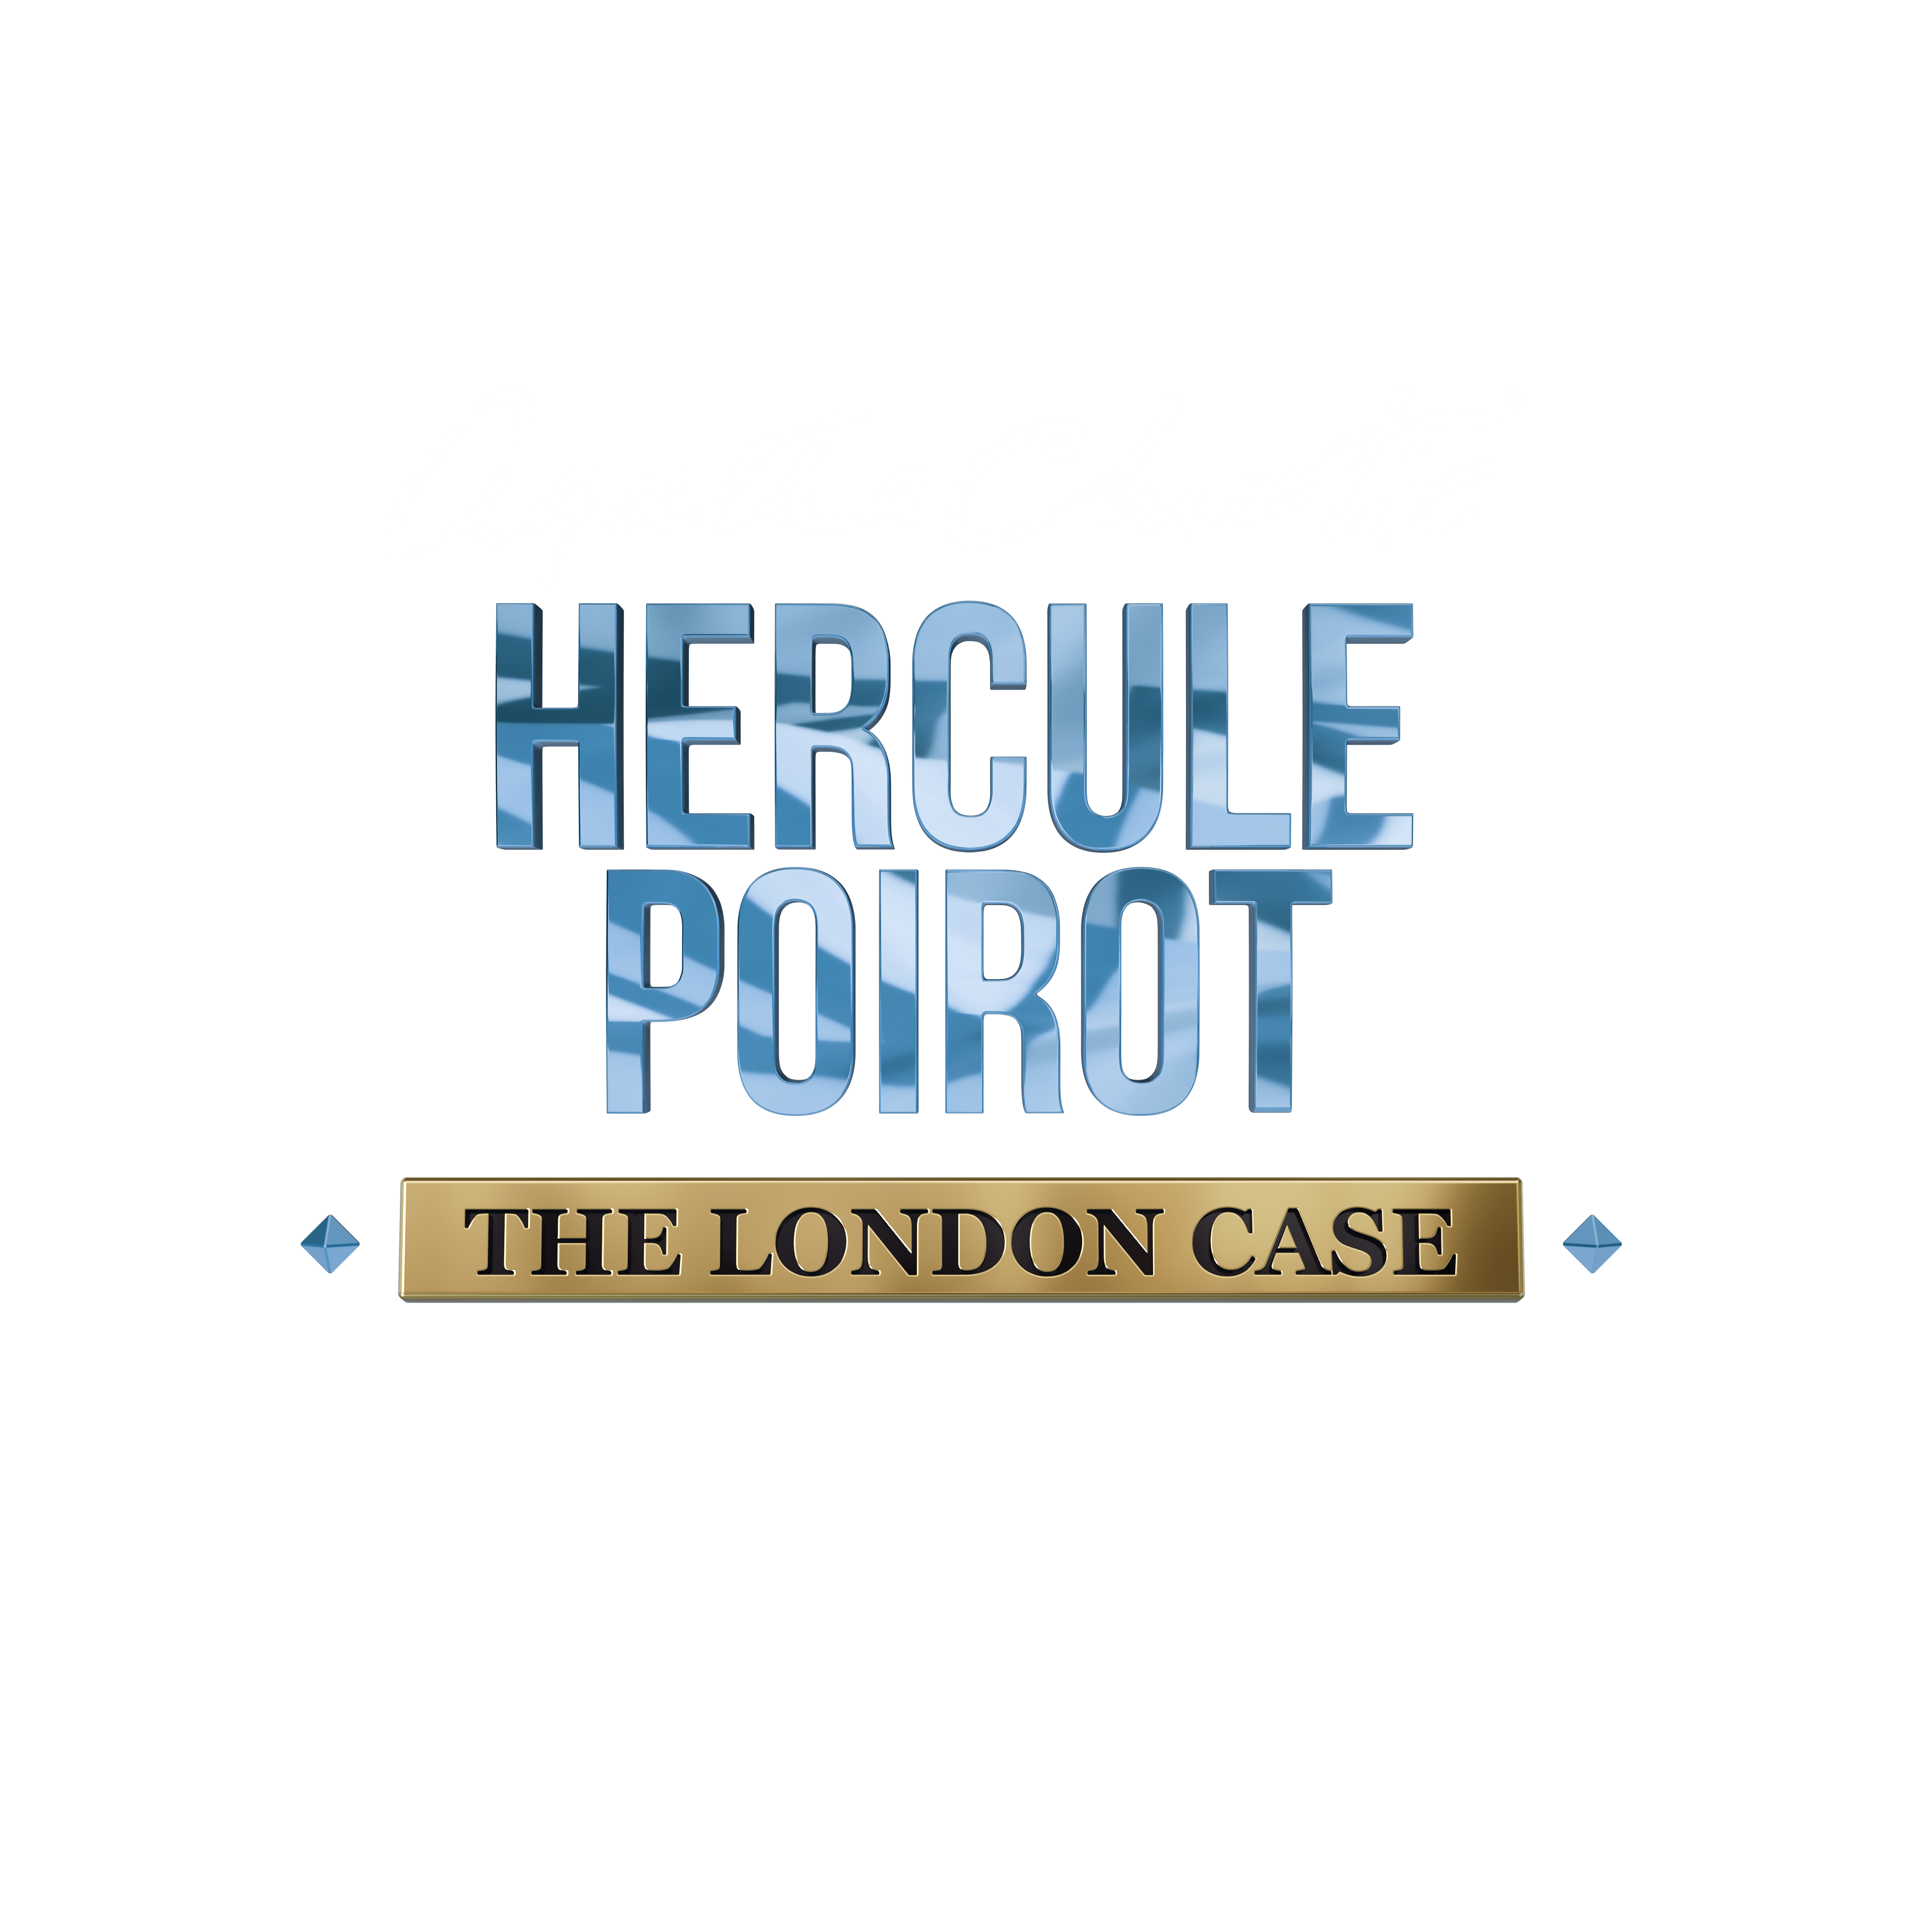 Agatha Christie PS4, and London - Hercule - Xbox Poirot: One, The PS5, PC Switch, Xbox announced for Case Gematsu Series